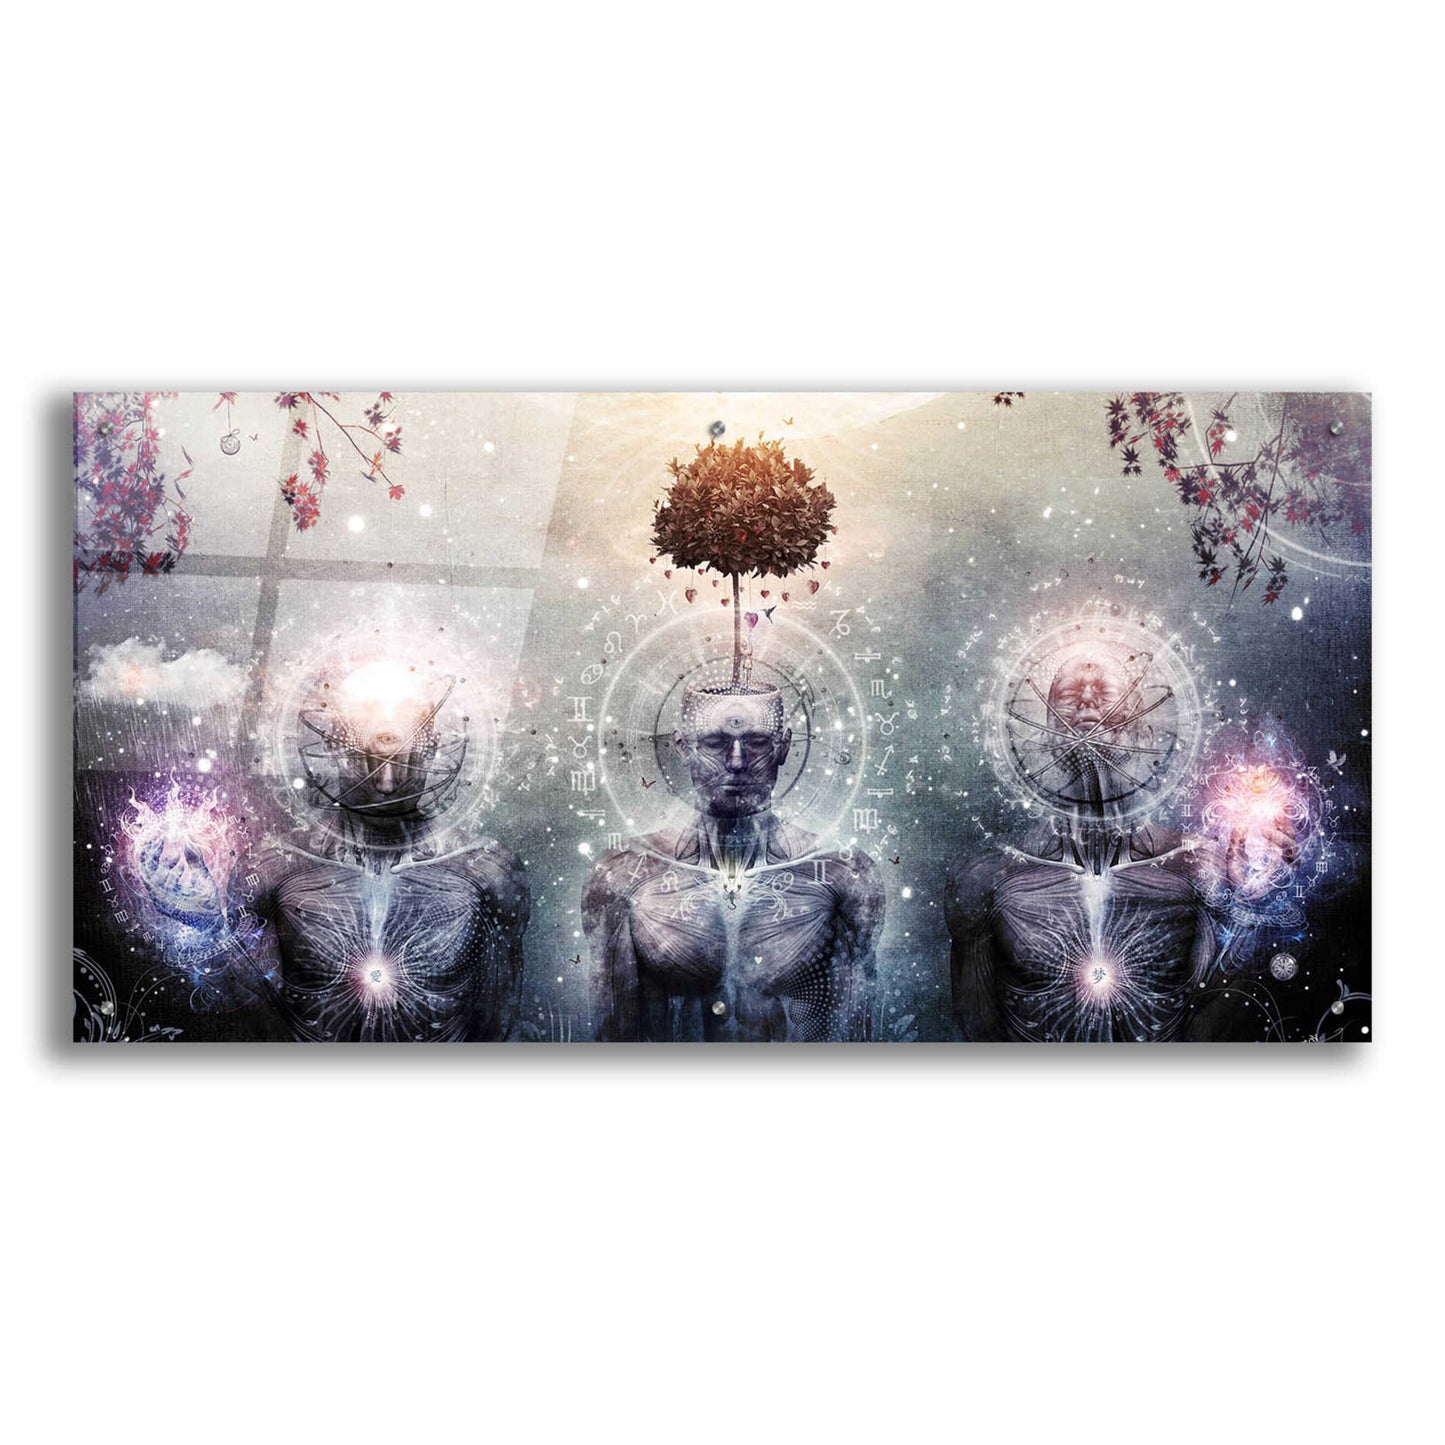 Epic Art 'Hope For The Sound Awakening' by Cameron Gray, Acrylic Glass Wall Art,48x24